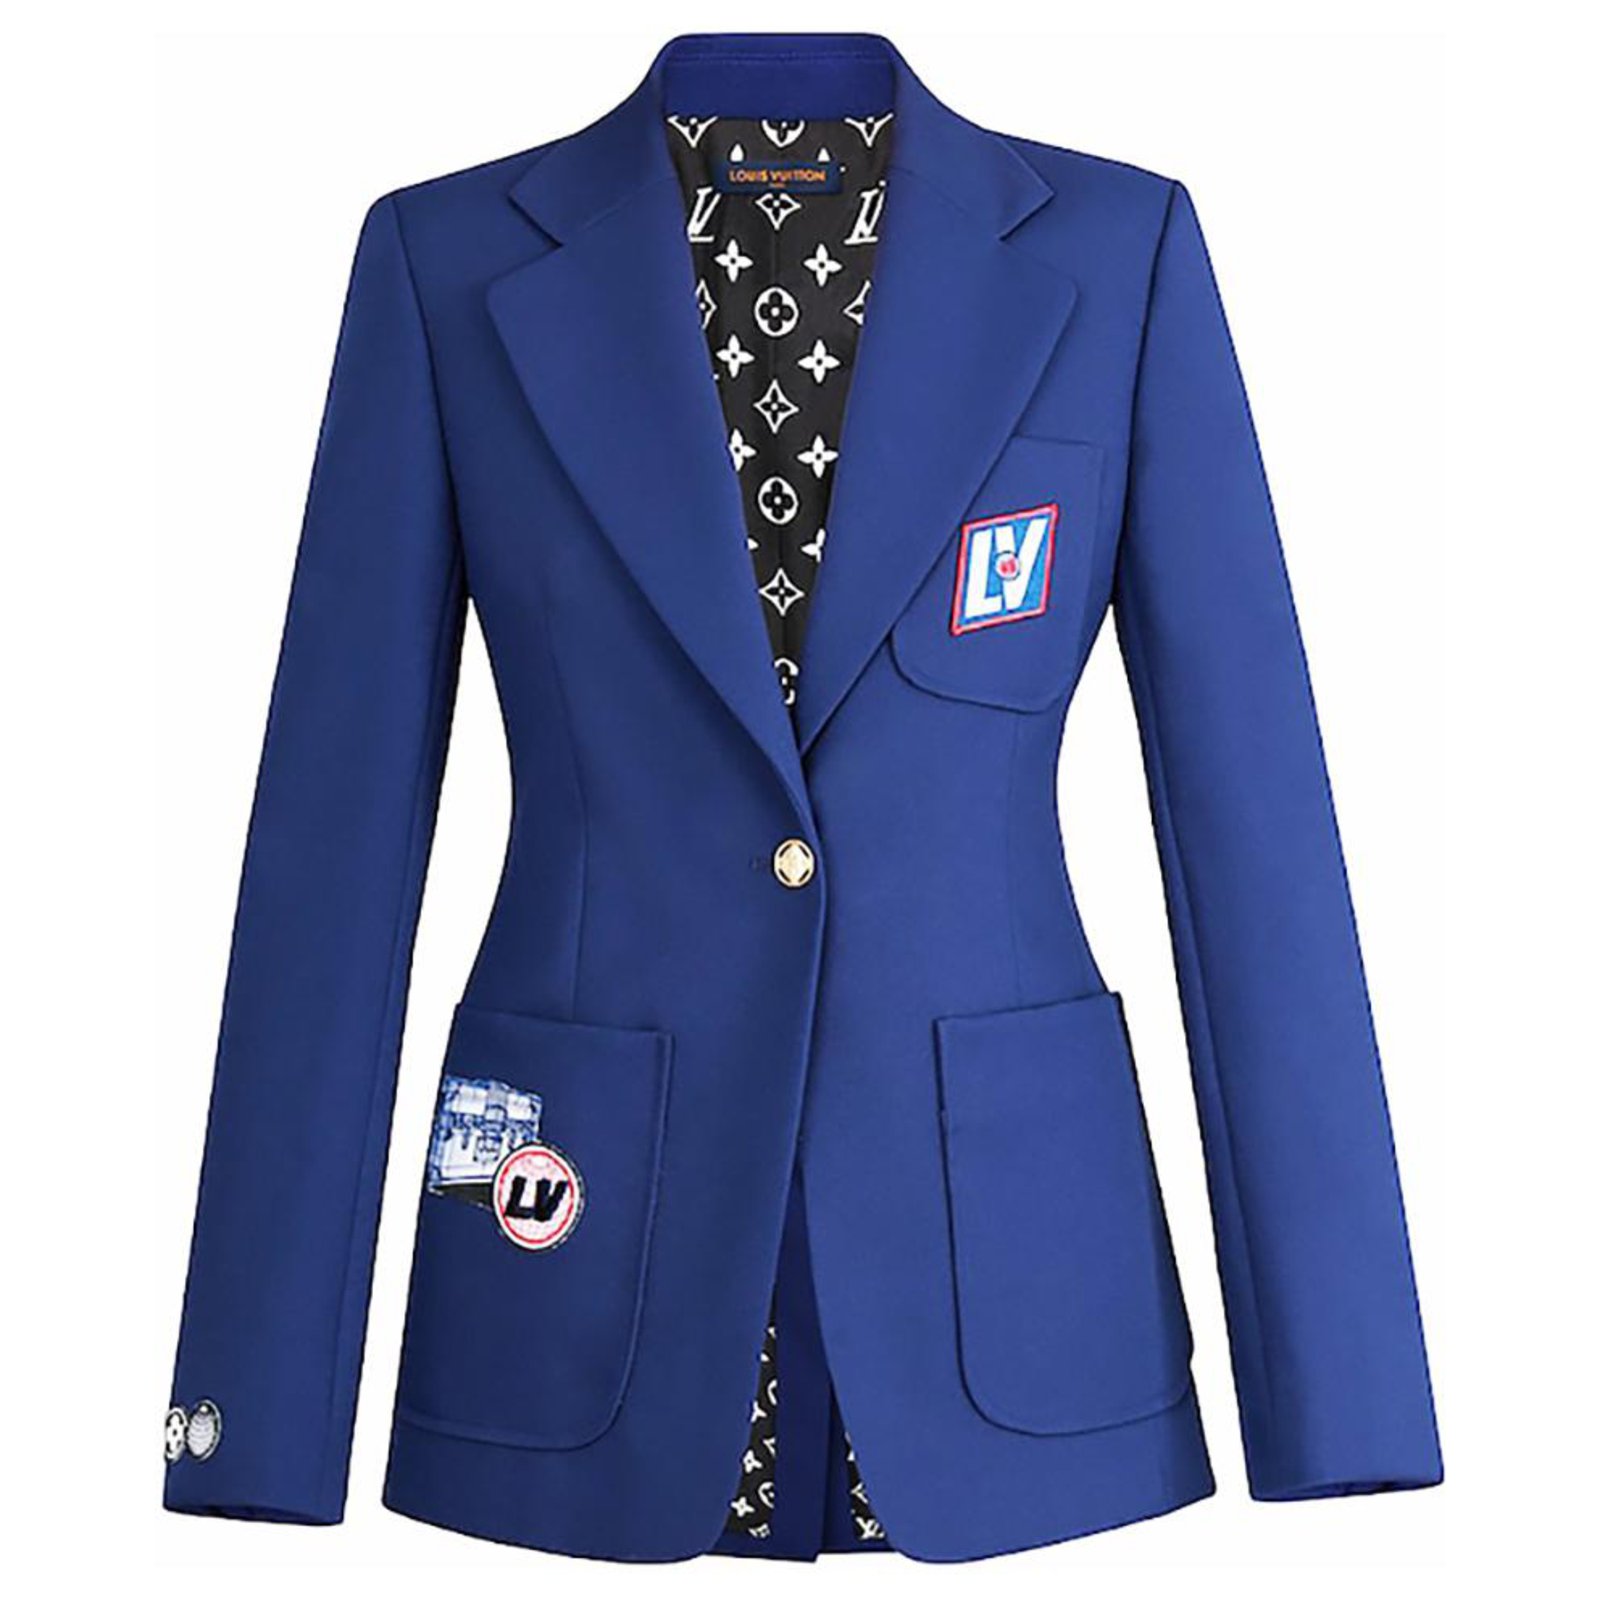 vuitton jacket blue and